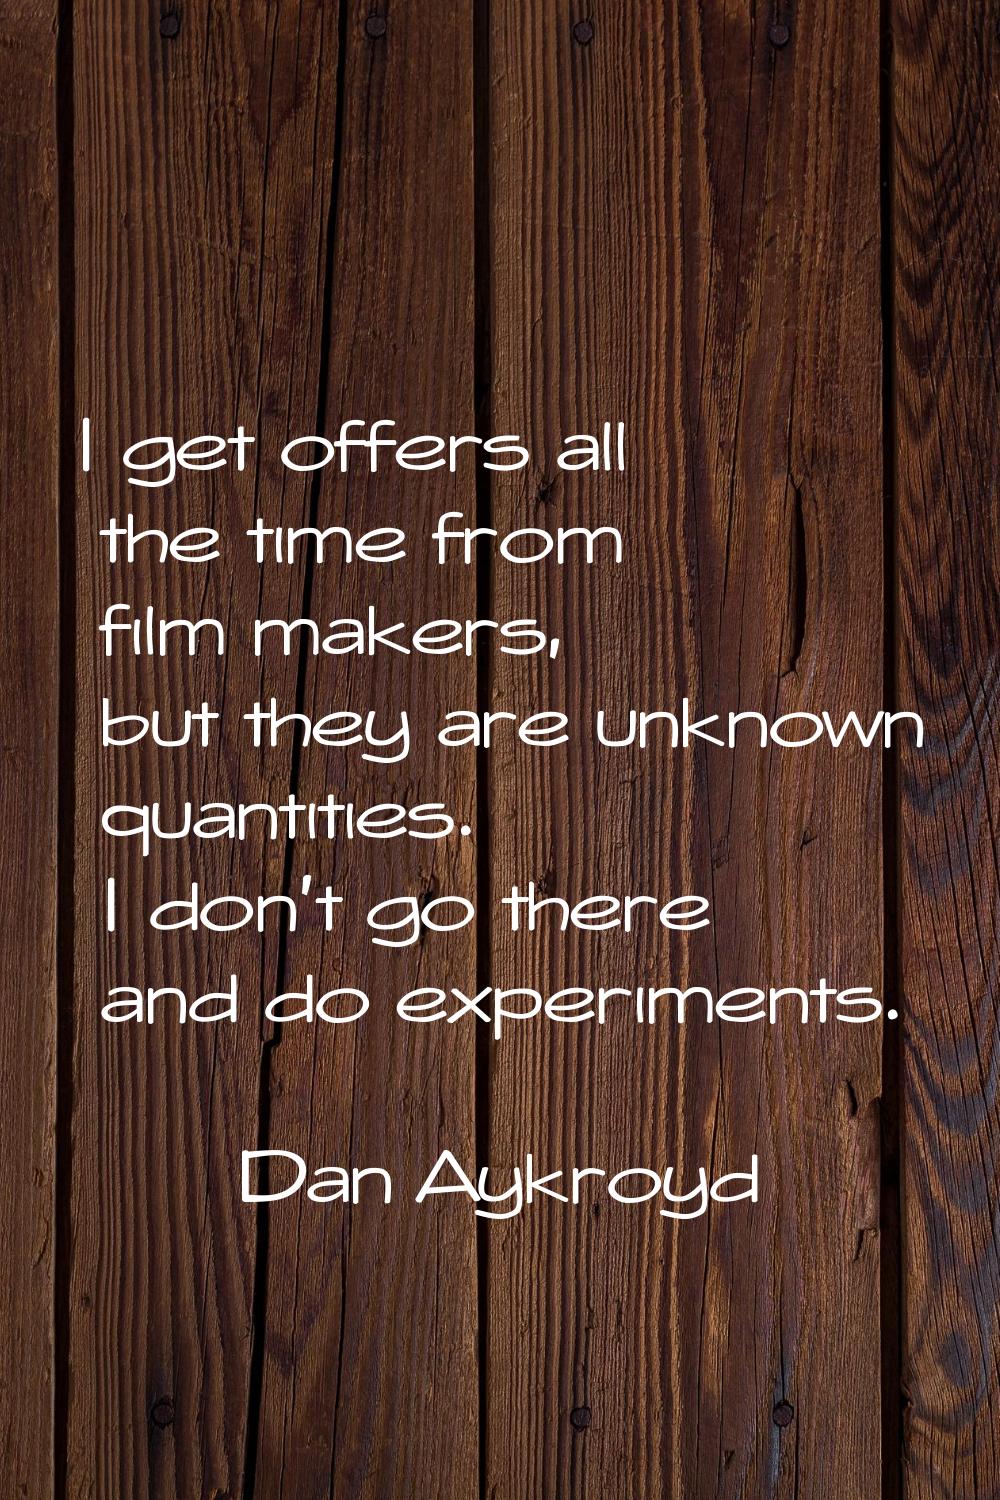 I get offers all the time from film makers, but they are unknown quantities. I don't go there and d